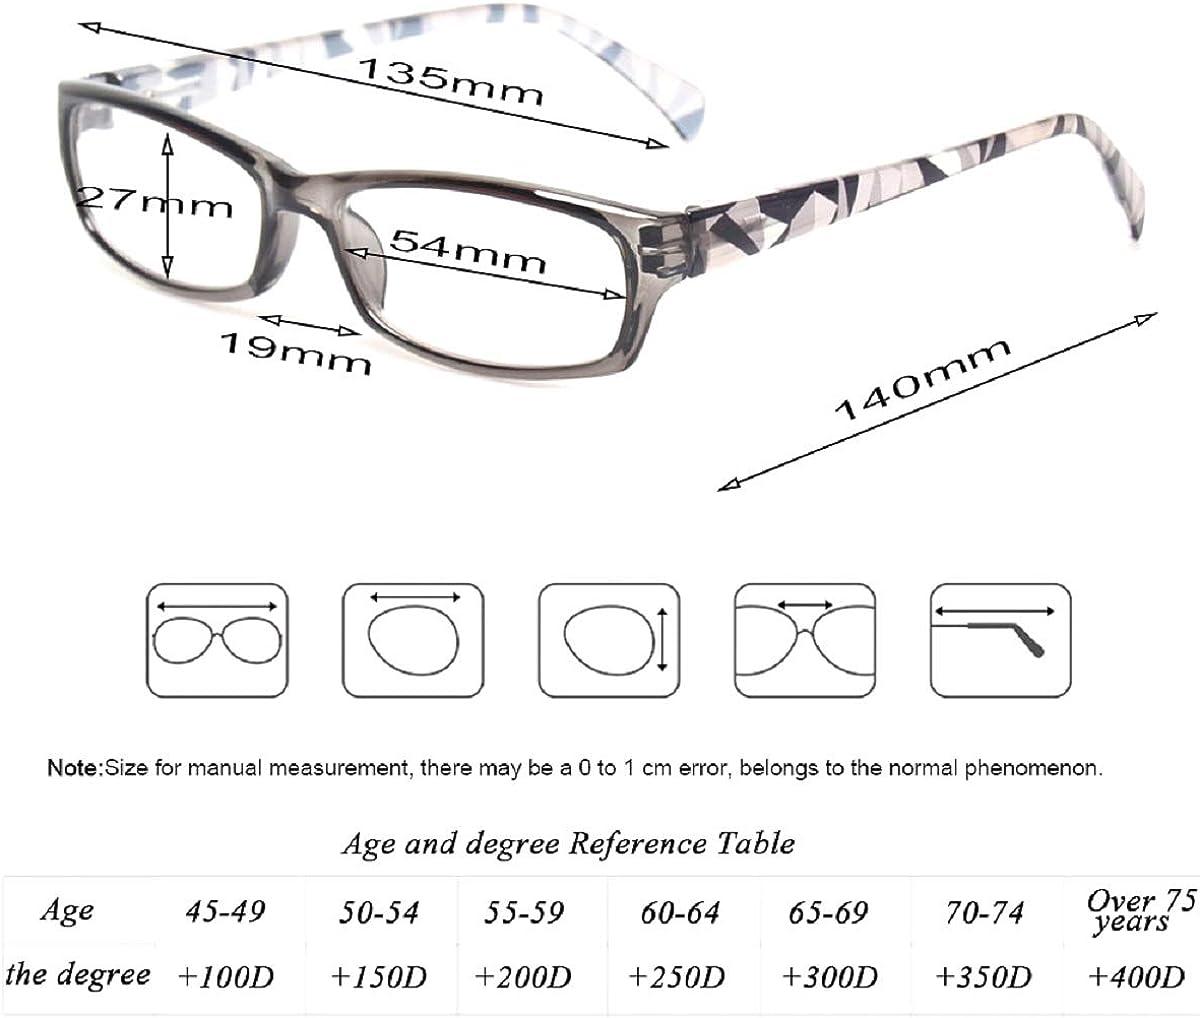 5 Pack Floral Pattern Reading Glasses for Women 5 Pairs Mix / +1.25